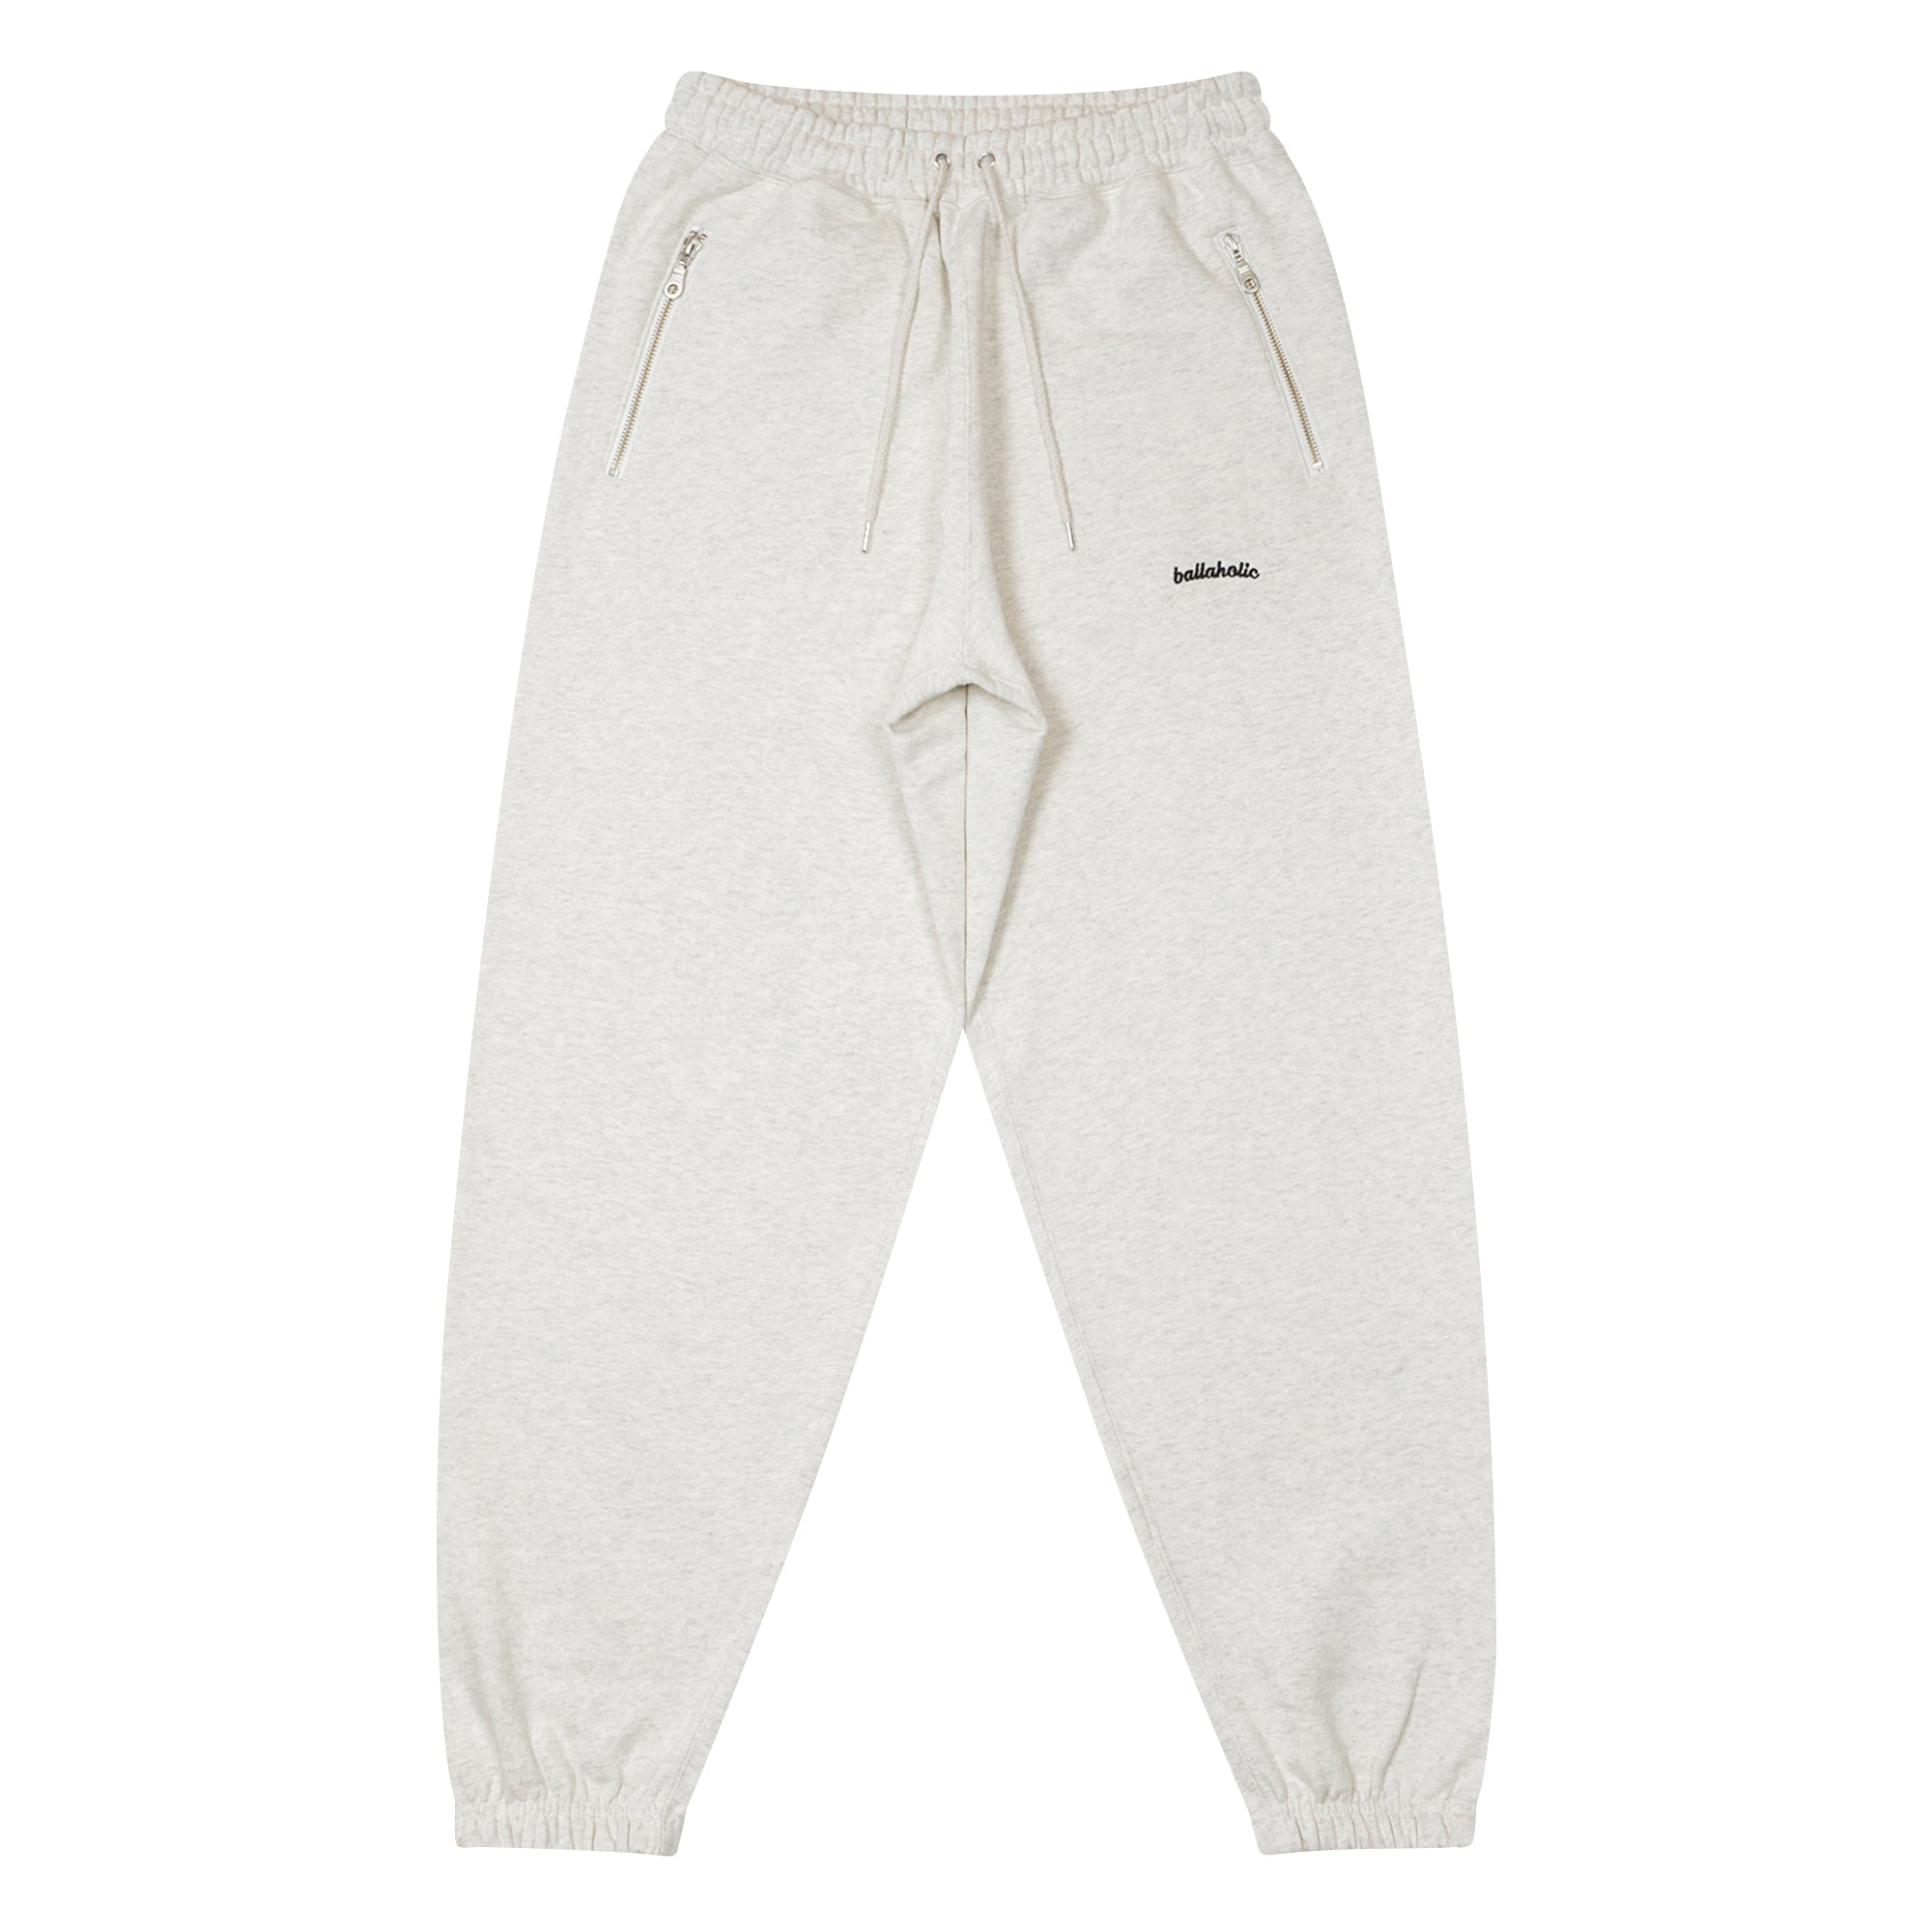 Buy SMALL LOGO SWEATPANTS for EUR 67.90 on !